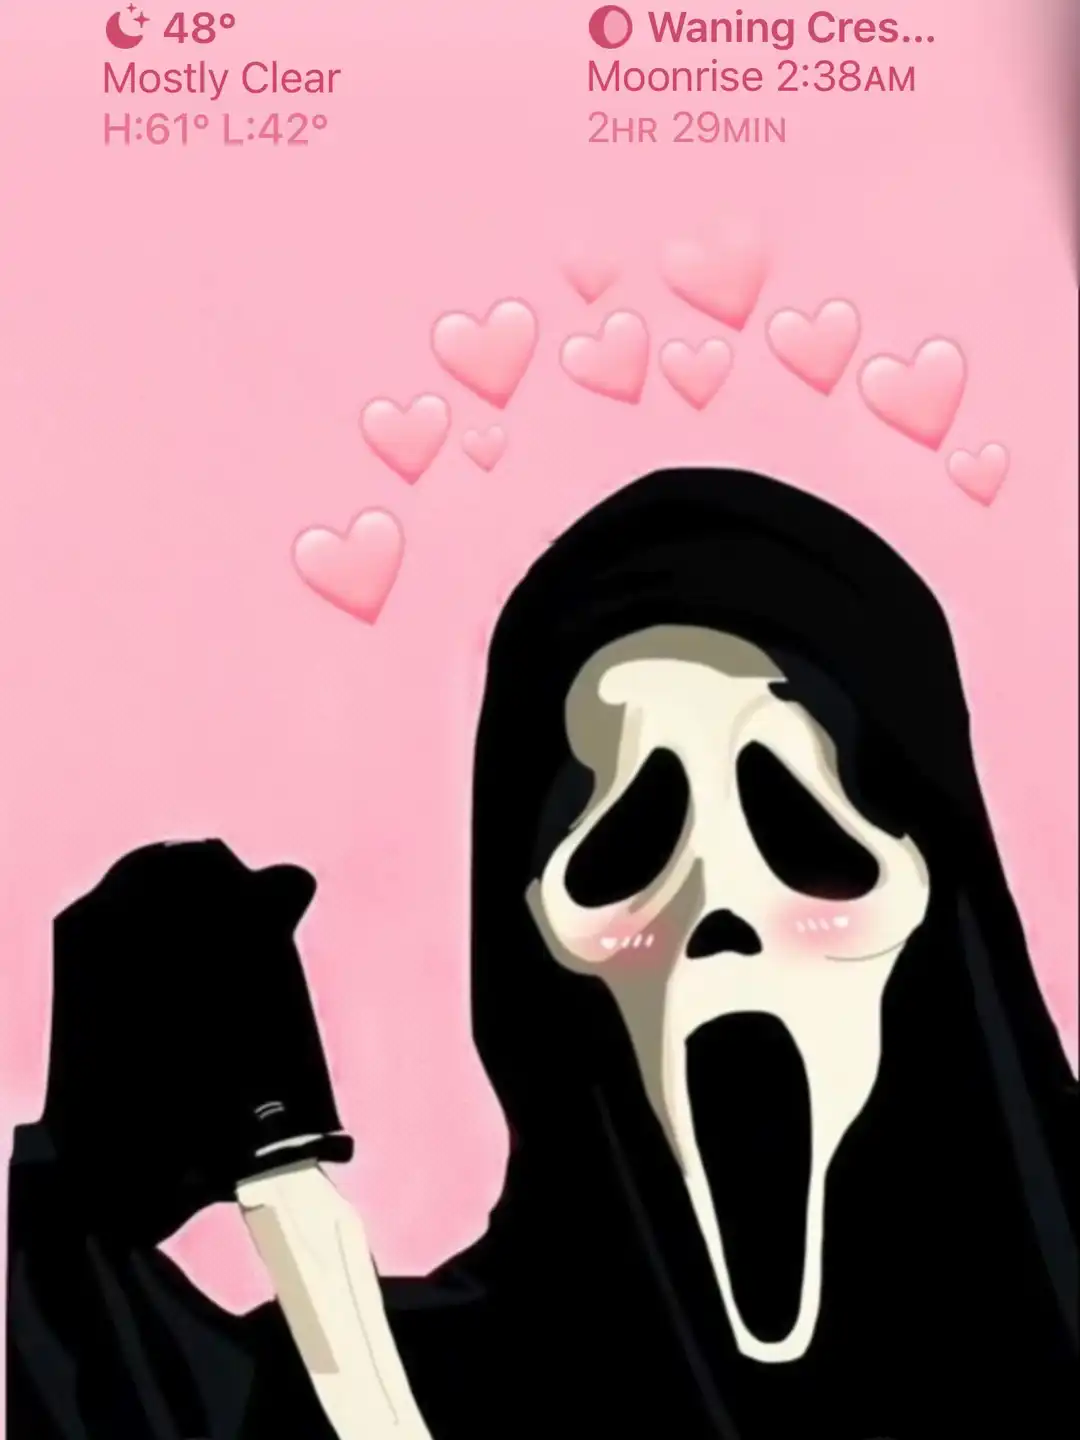 A scary face with hearts on it - Ghostface